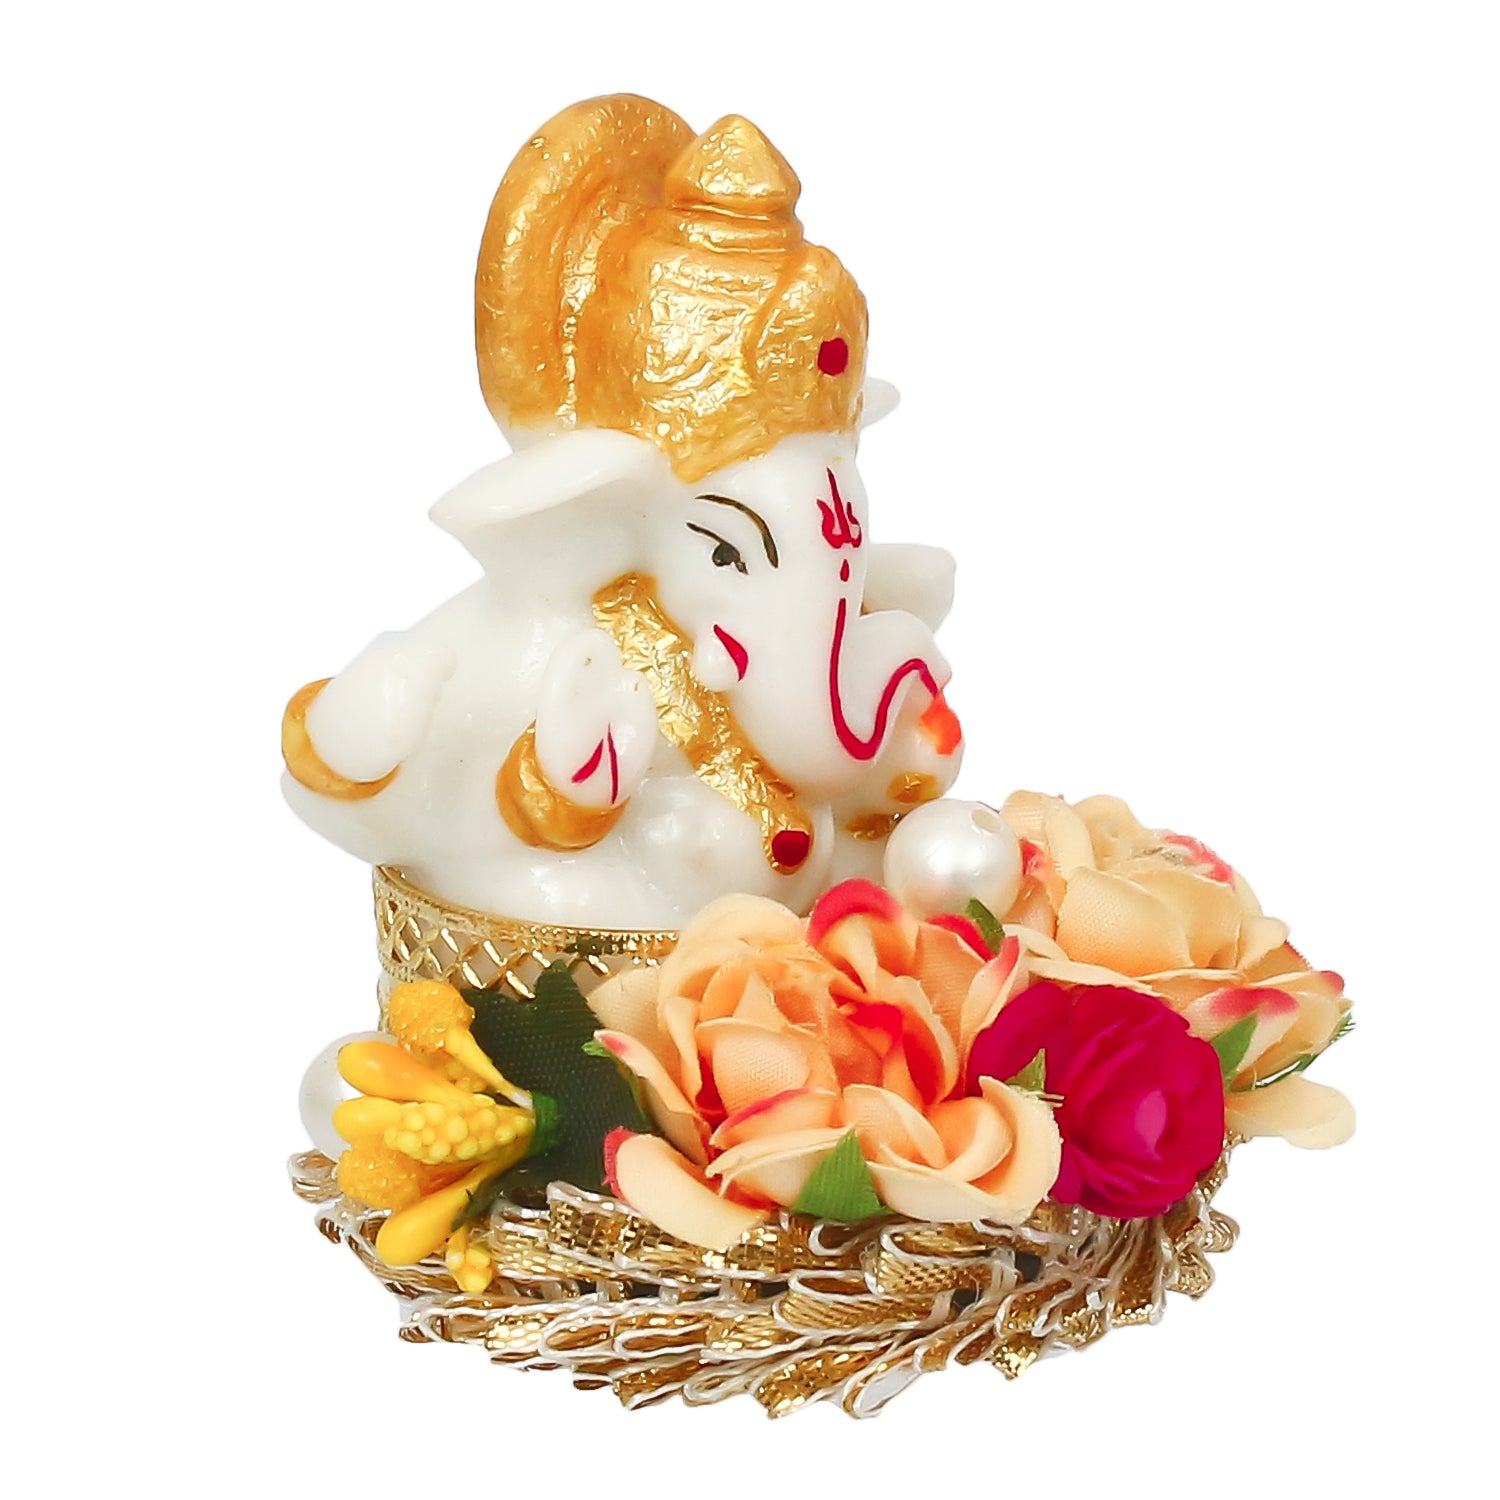 Lord Ganesha Idol On Decorative Handicrafted Plate For Home And Car Dashboard 3